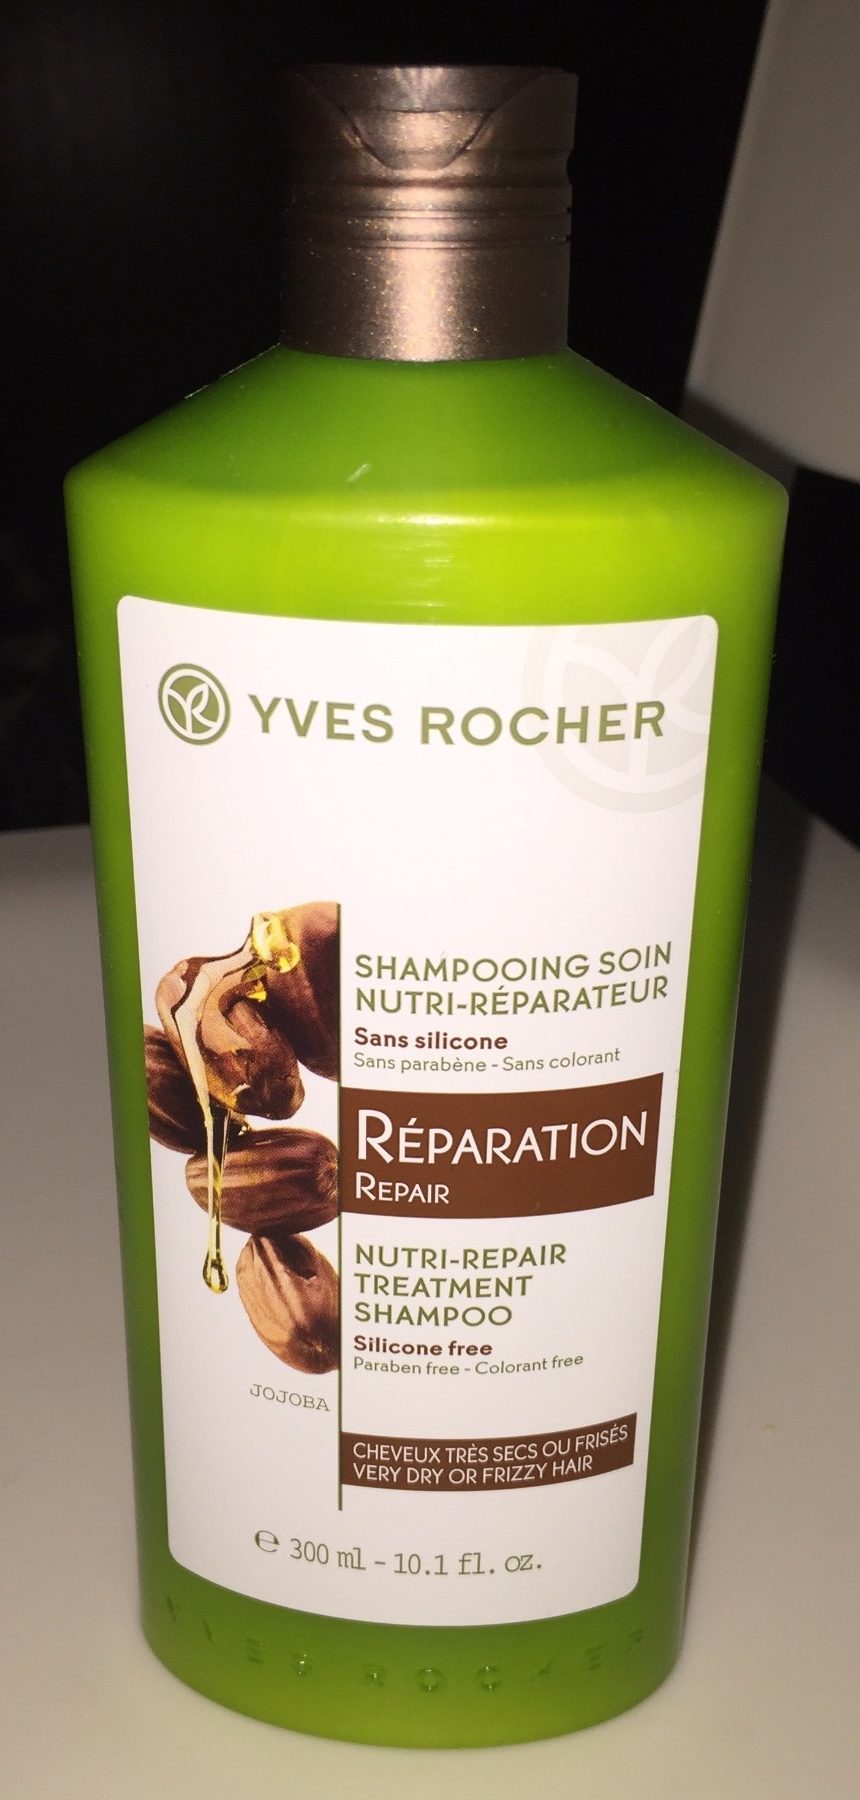 Yves Rocher Reparation Shampooing Soin Nutri-Reparateur - Product - fr